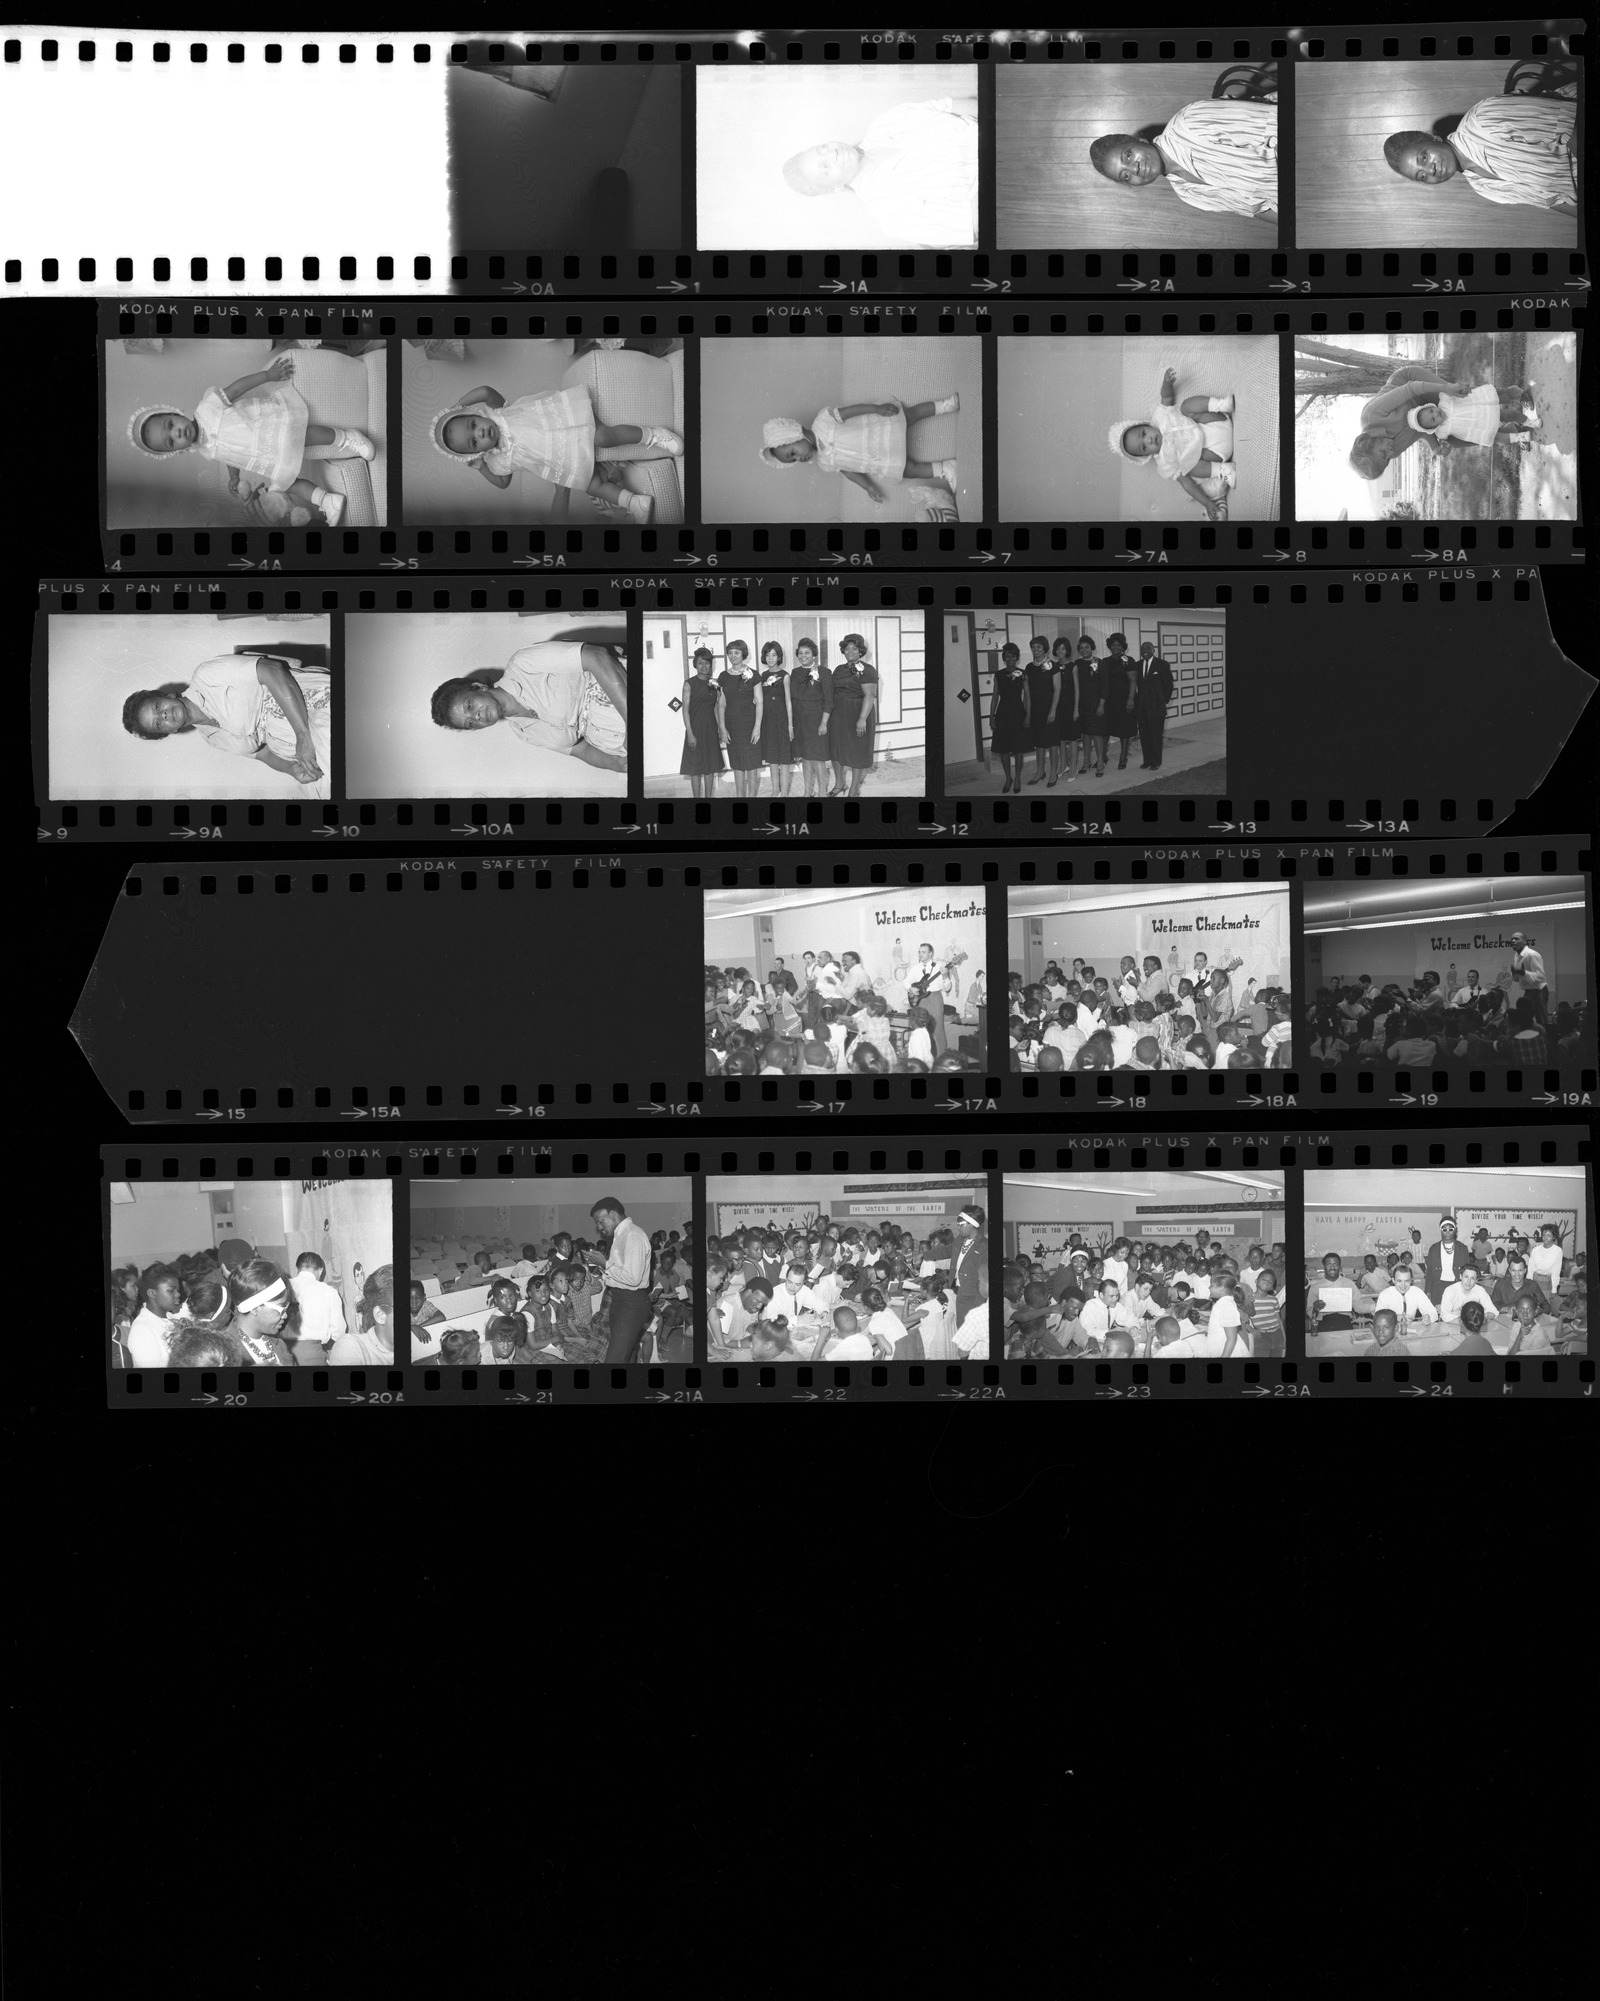 Set of negatives by Clinton Wright including Mrs. Daisy Buffington, Mrs. Burner's grandchild, Mrs. Simmons, A.M. & N. Alumni club, Checkmates at KC, Judo class at Jefferson, 1965, page 1